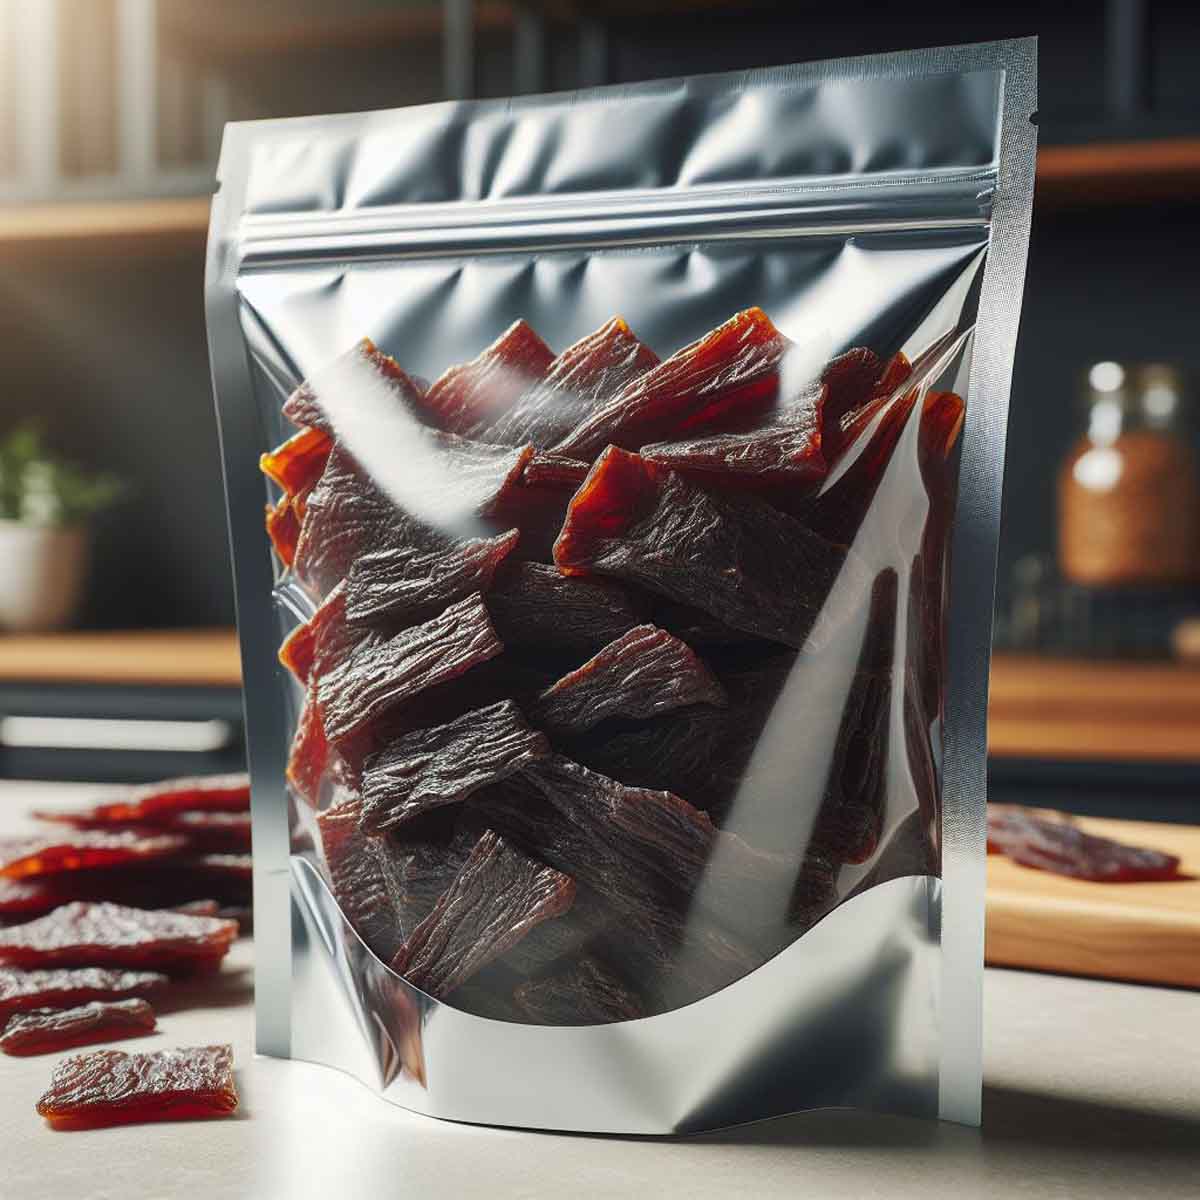 Shiny Mylar bags safeguarding beef jerky against moisture and light.